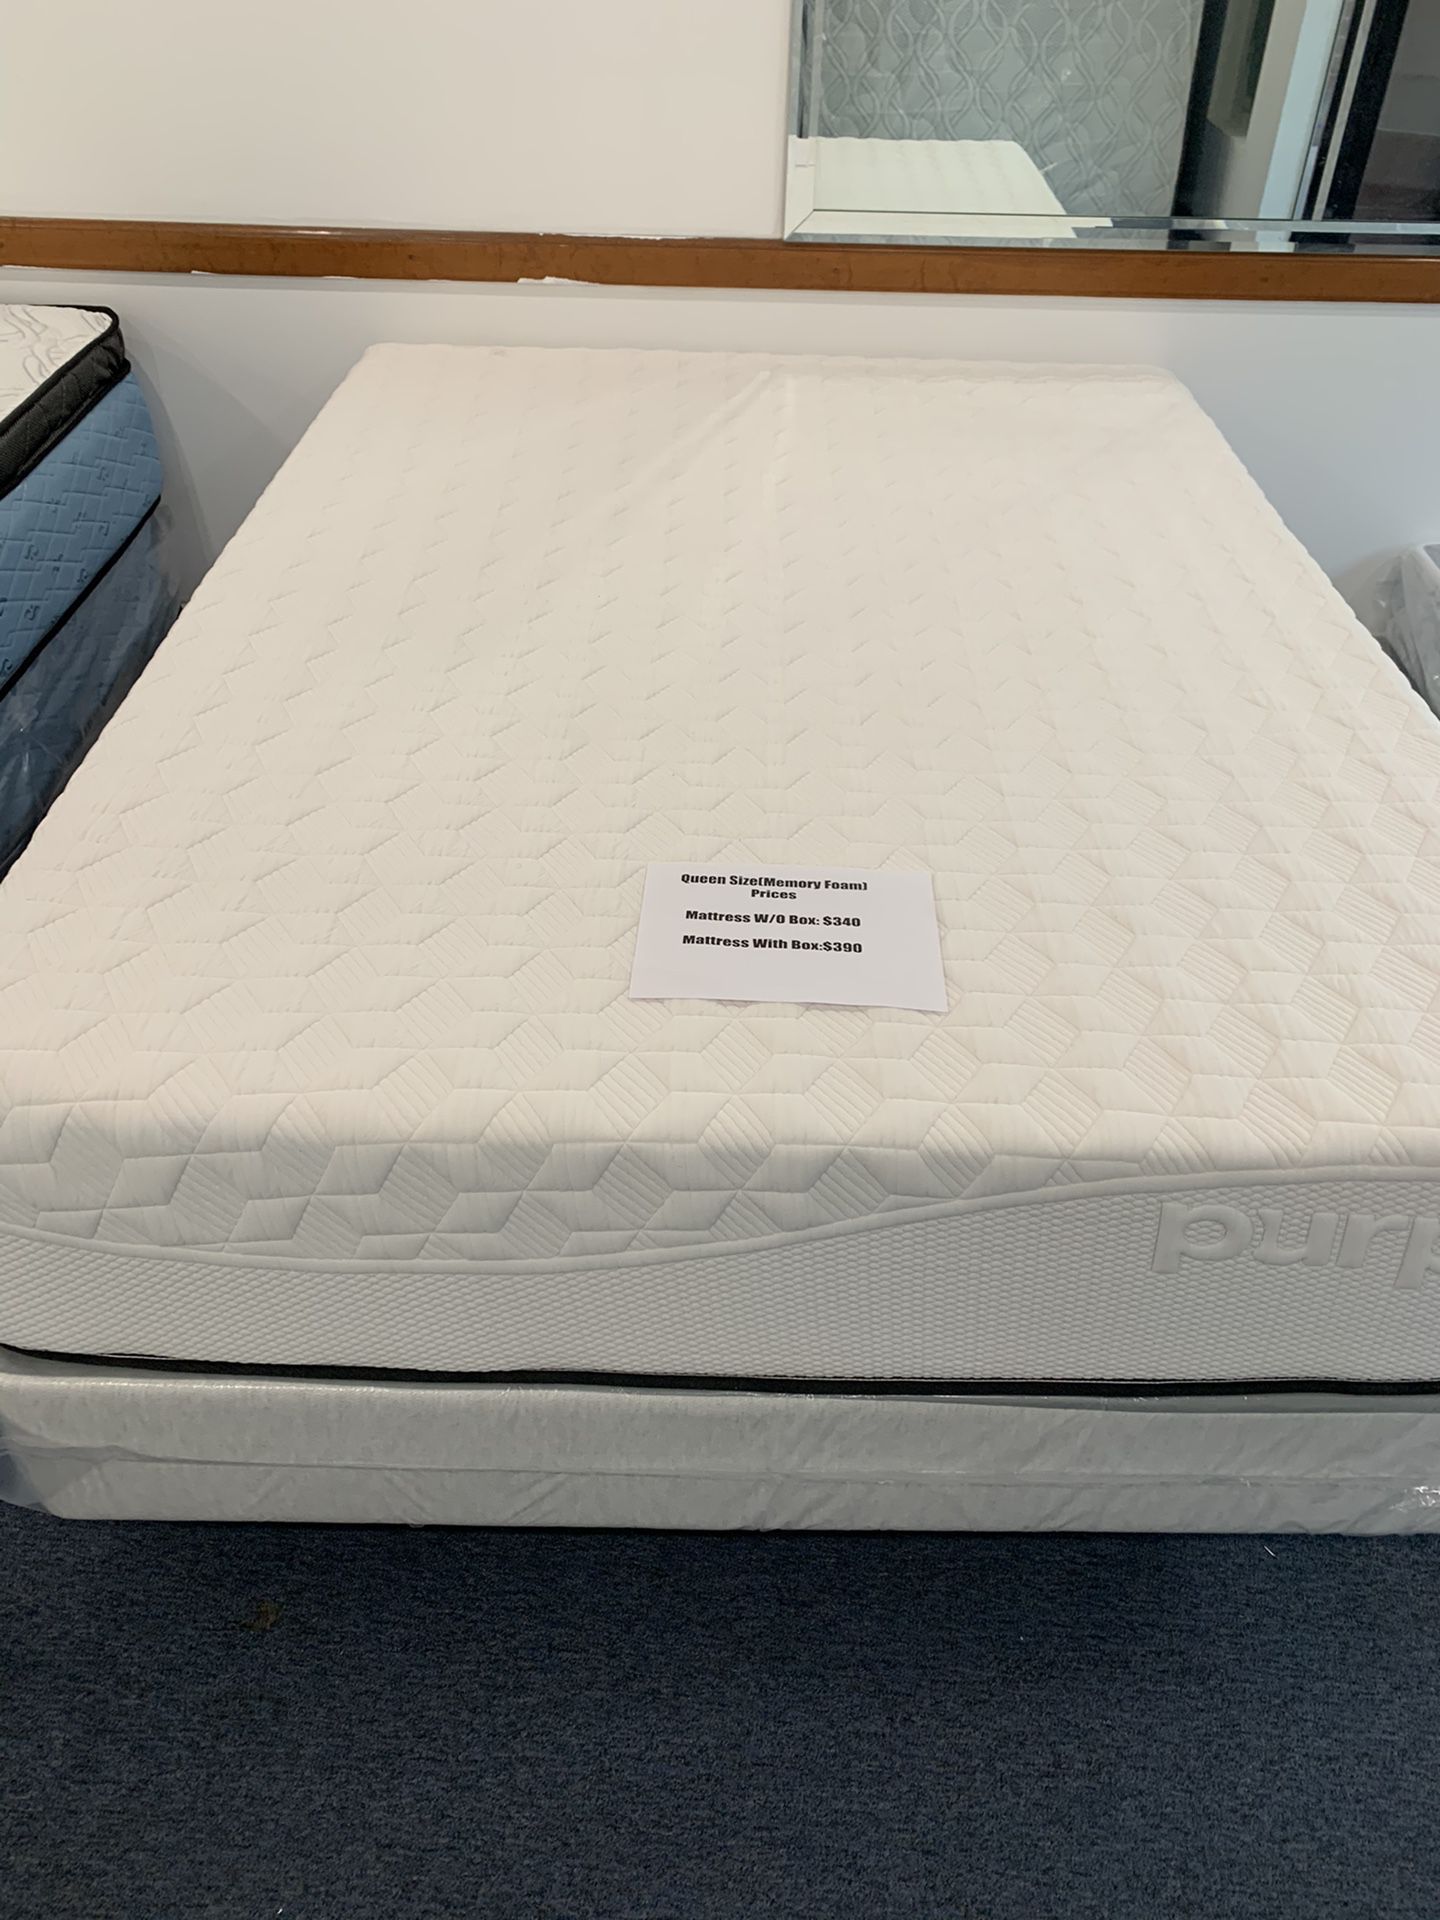 We have all sizes memory foam twin full queen and king